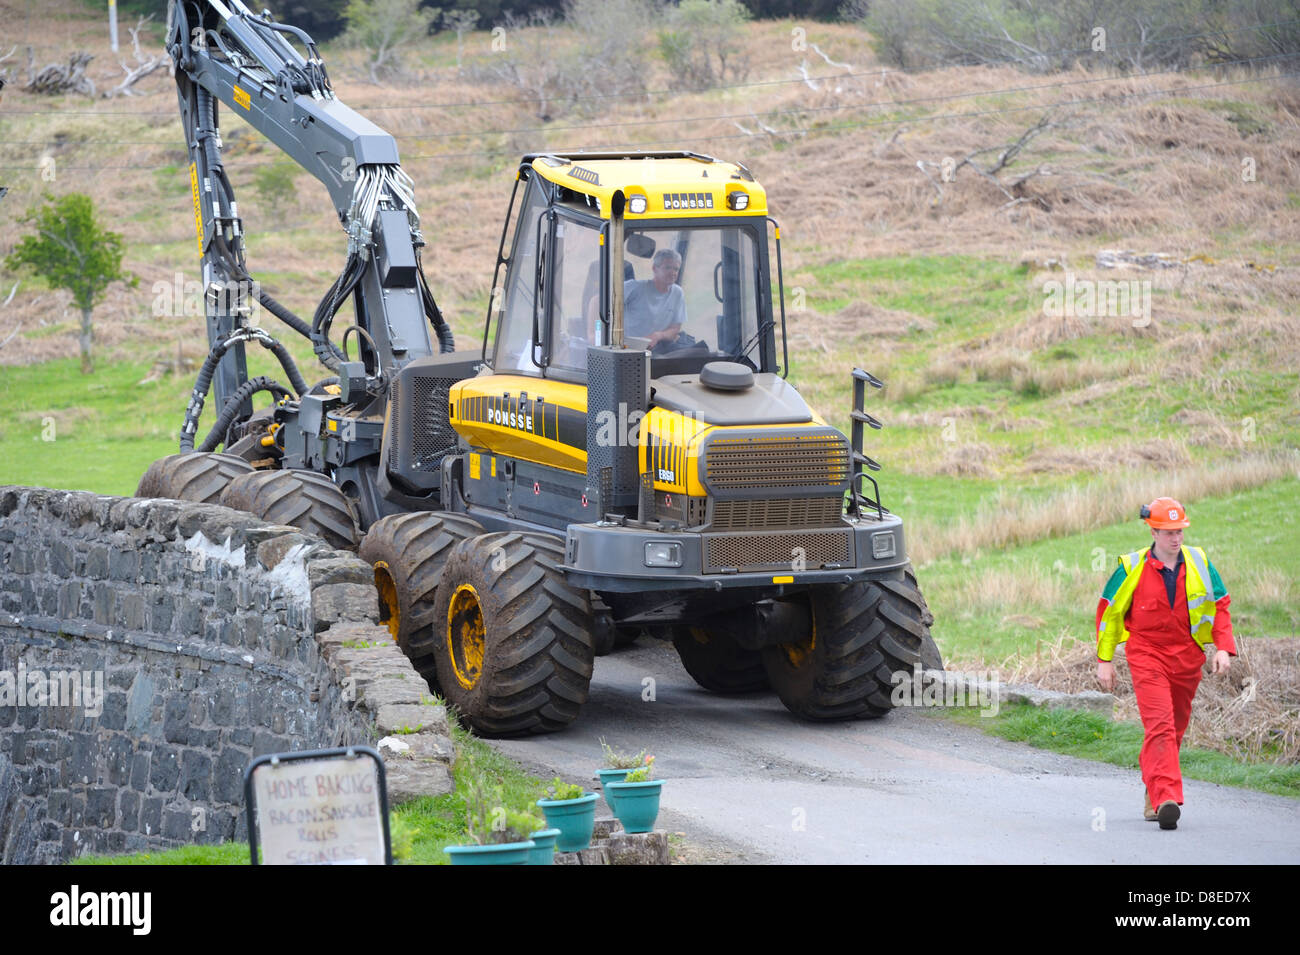 A large and heavy piece of timber logging  harvesting machinery being moved through a small village on the isle of mull. Stock Photo